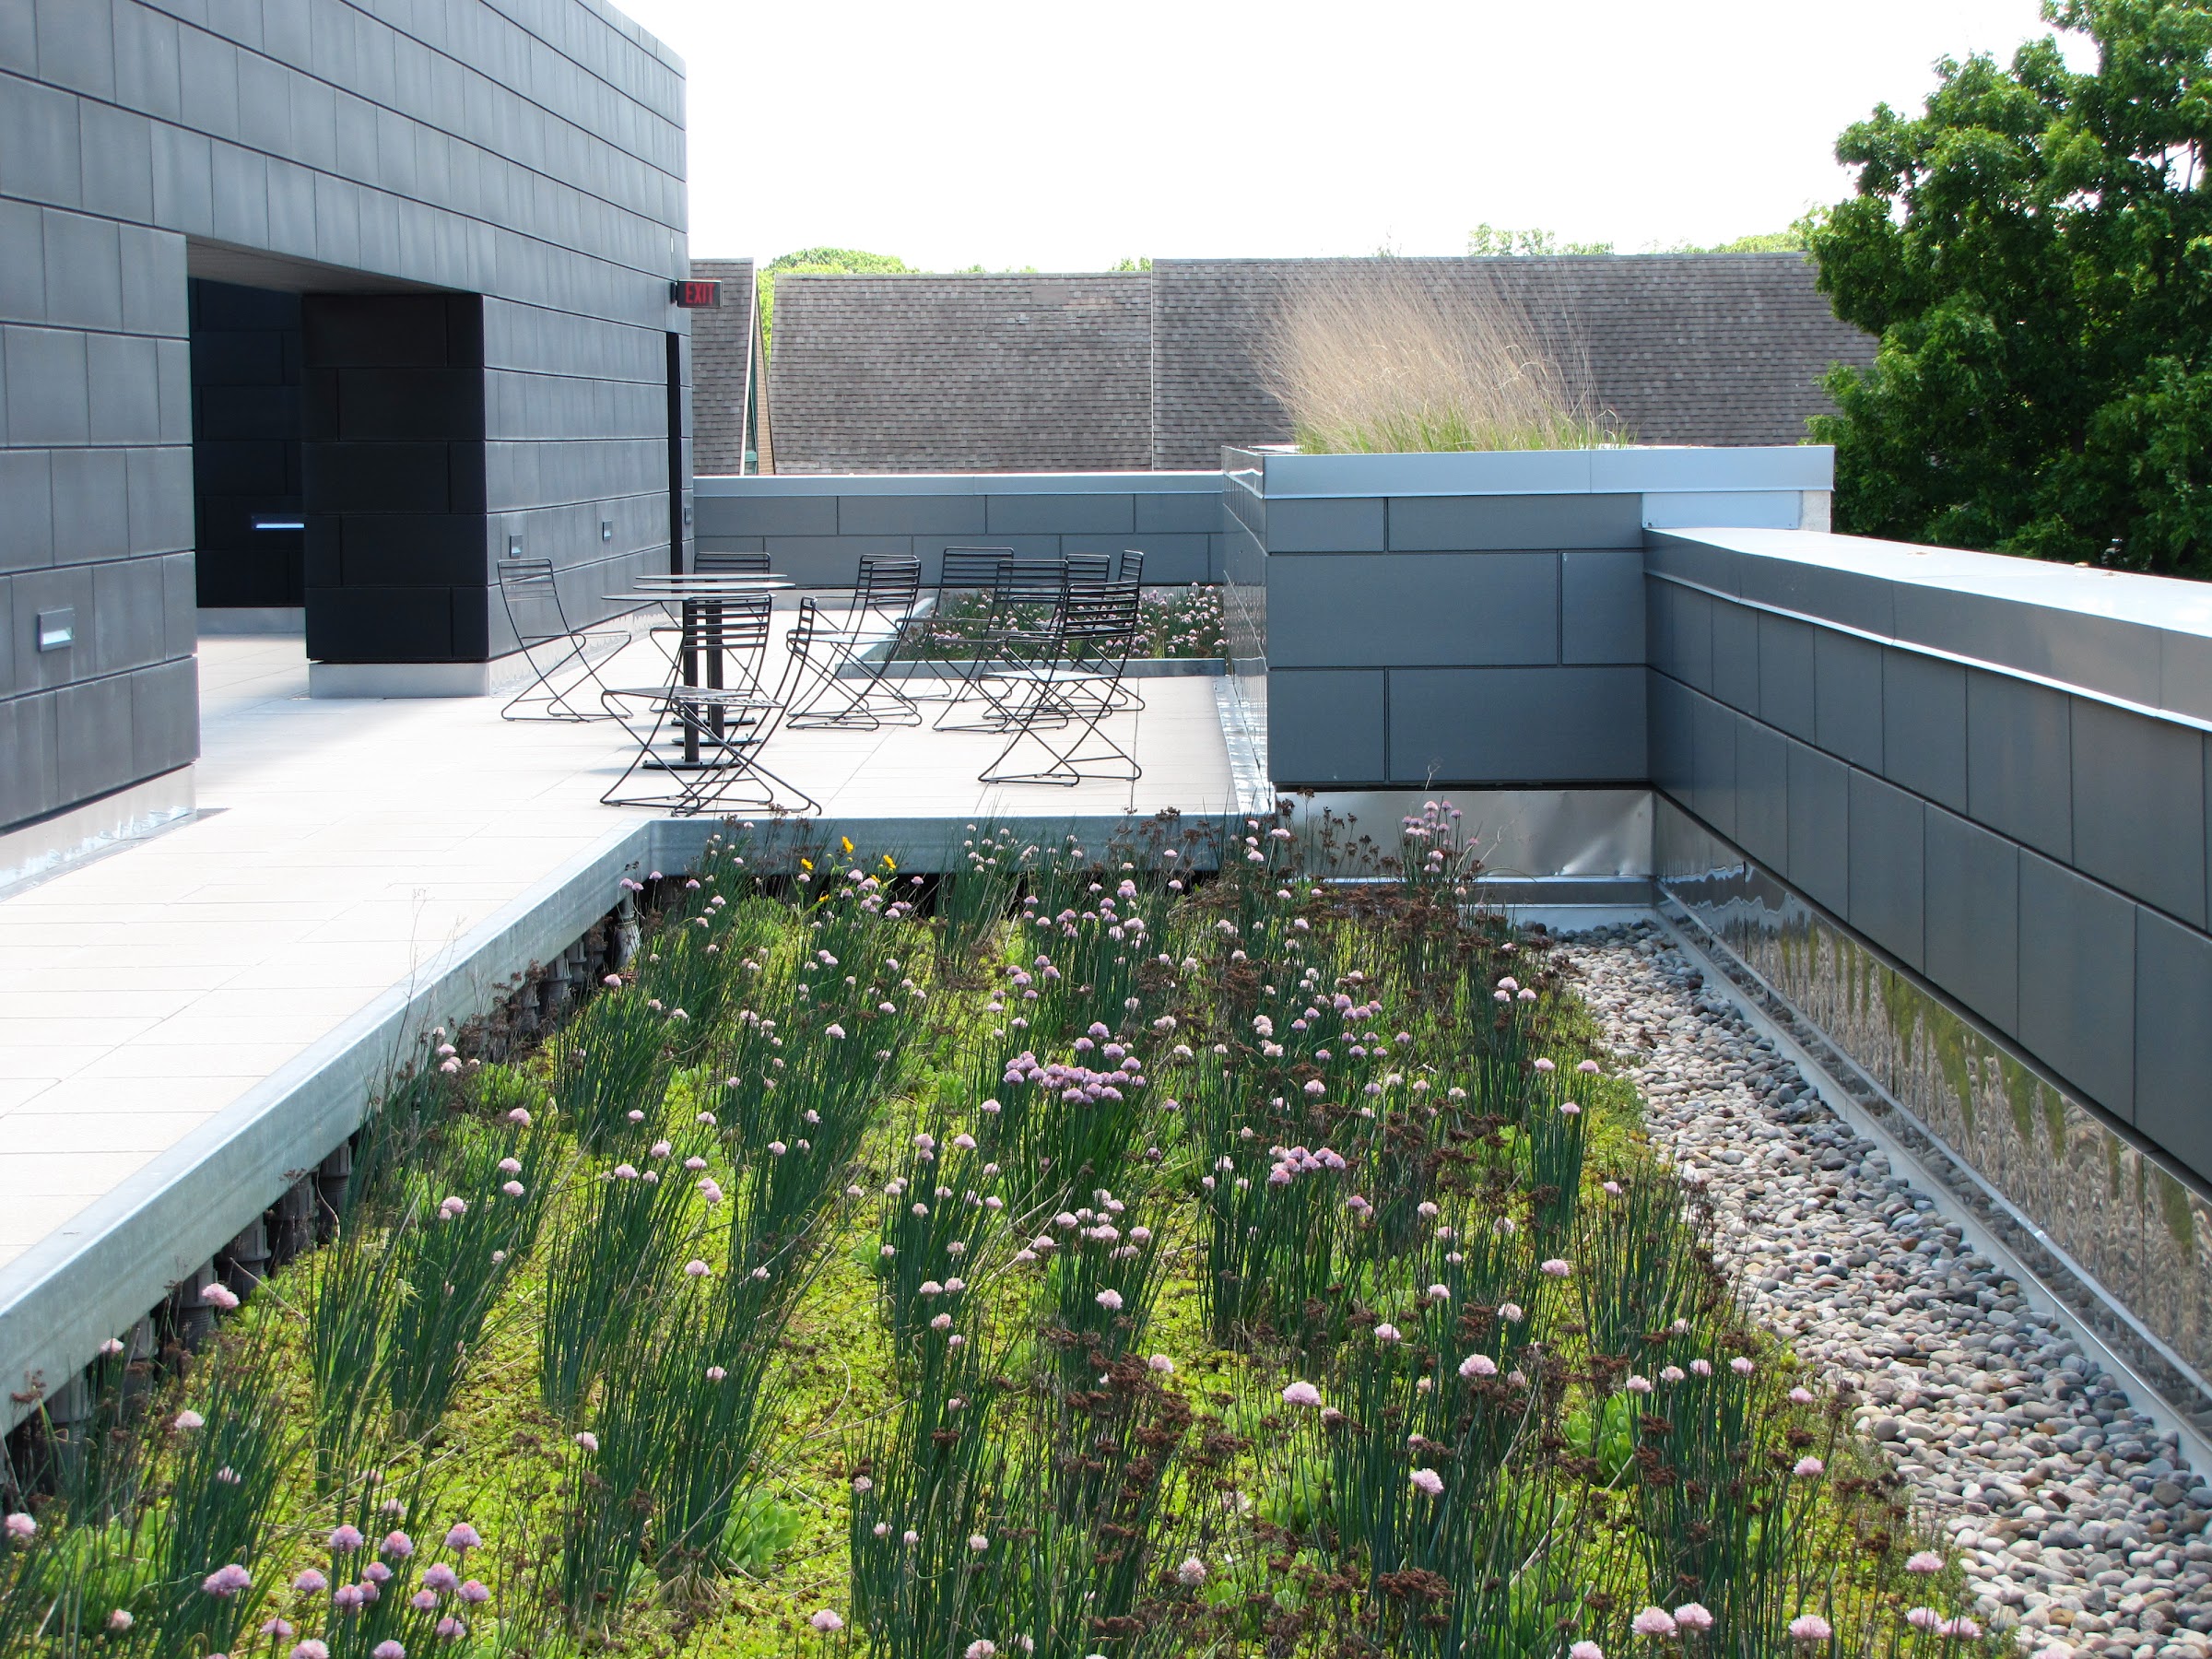 Plants on the green roof of the Science building help with stormwater runoff. Photo by Emily Nietering